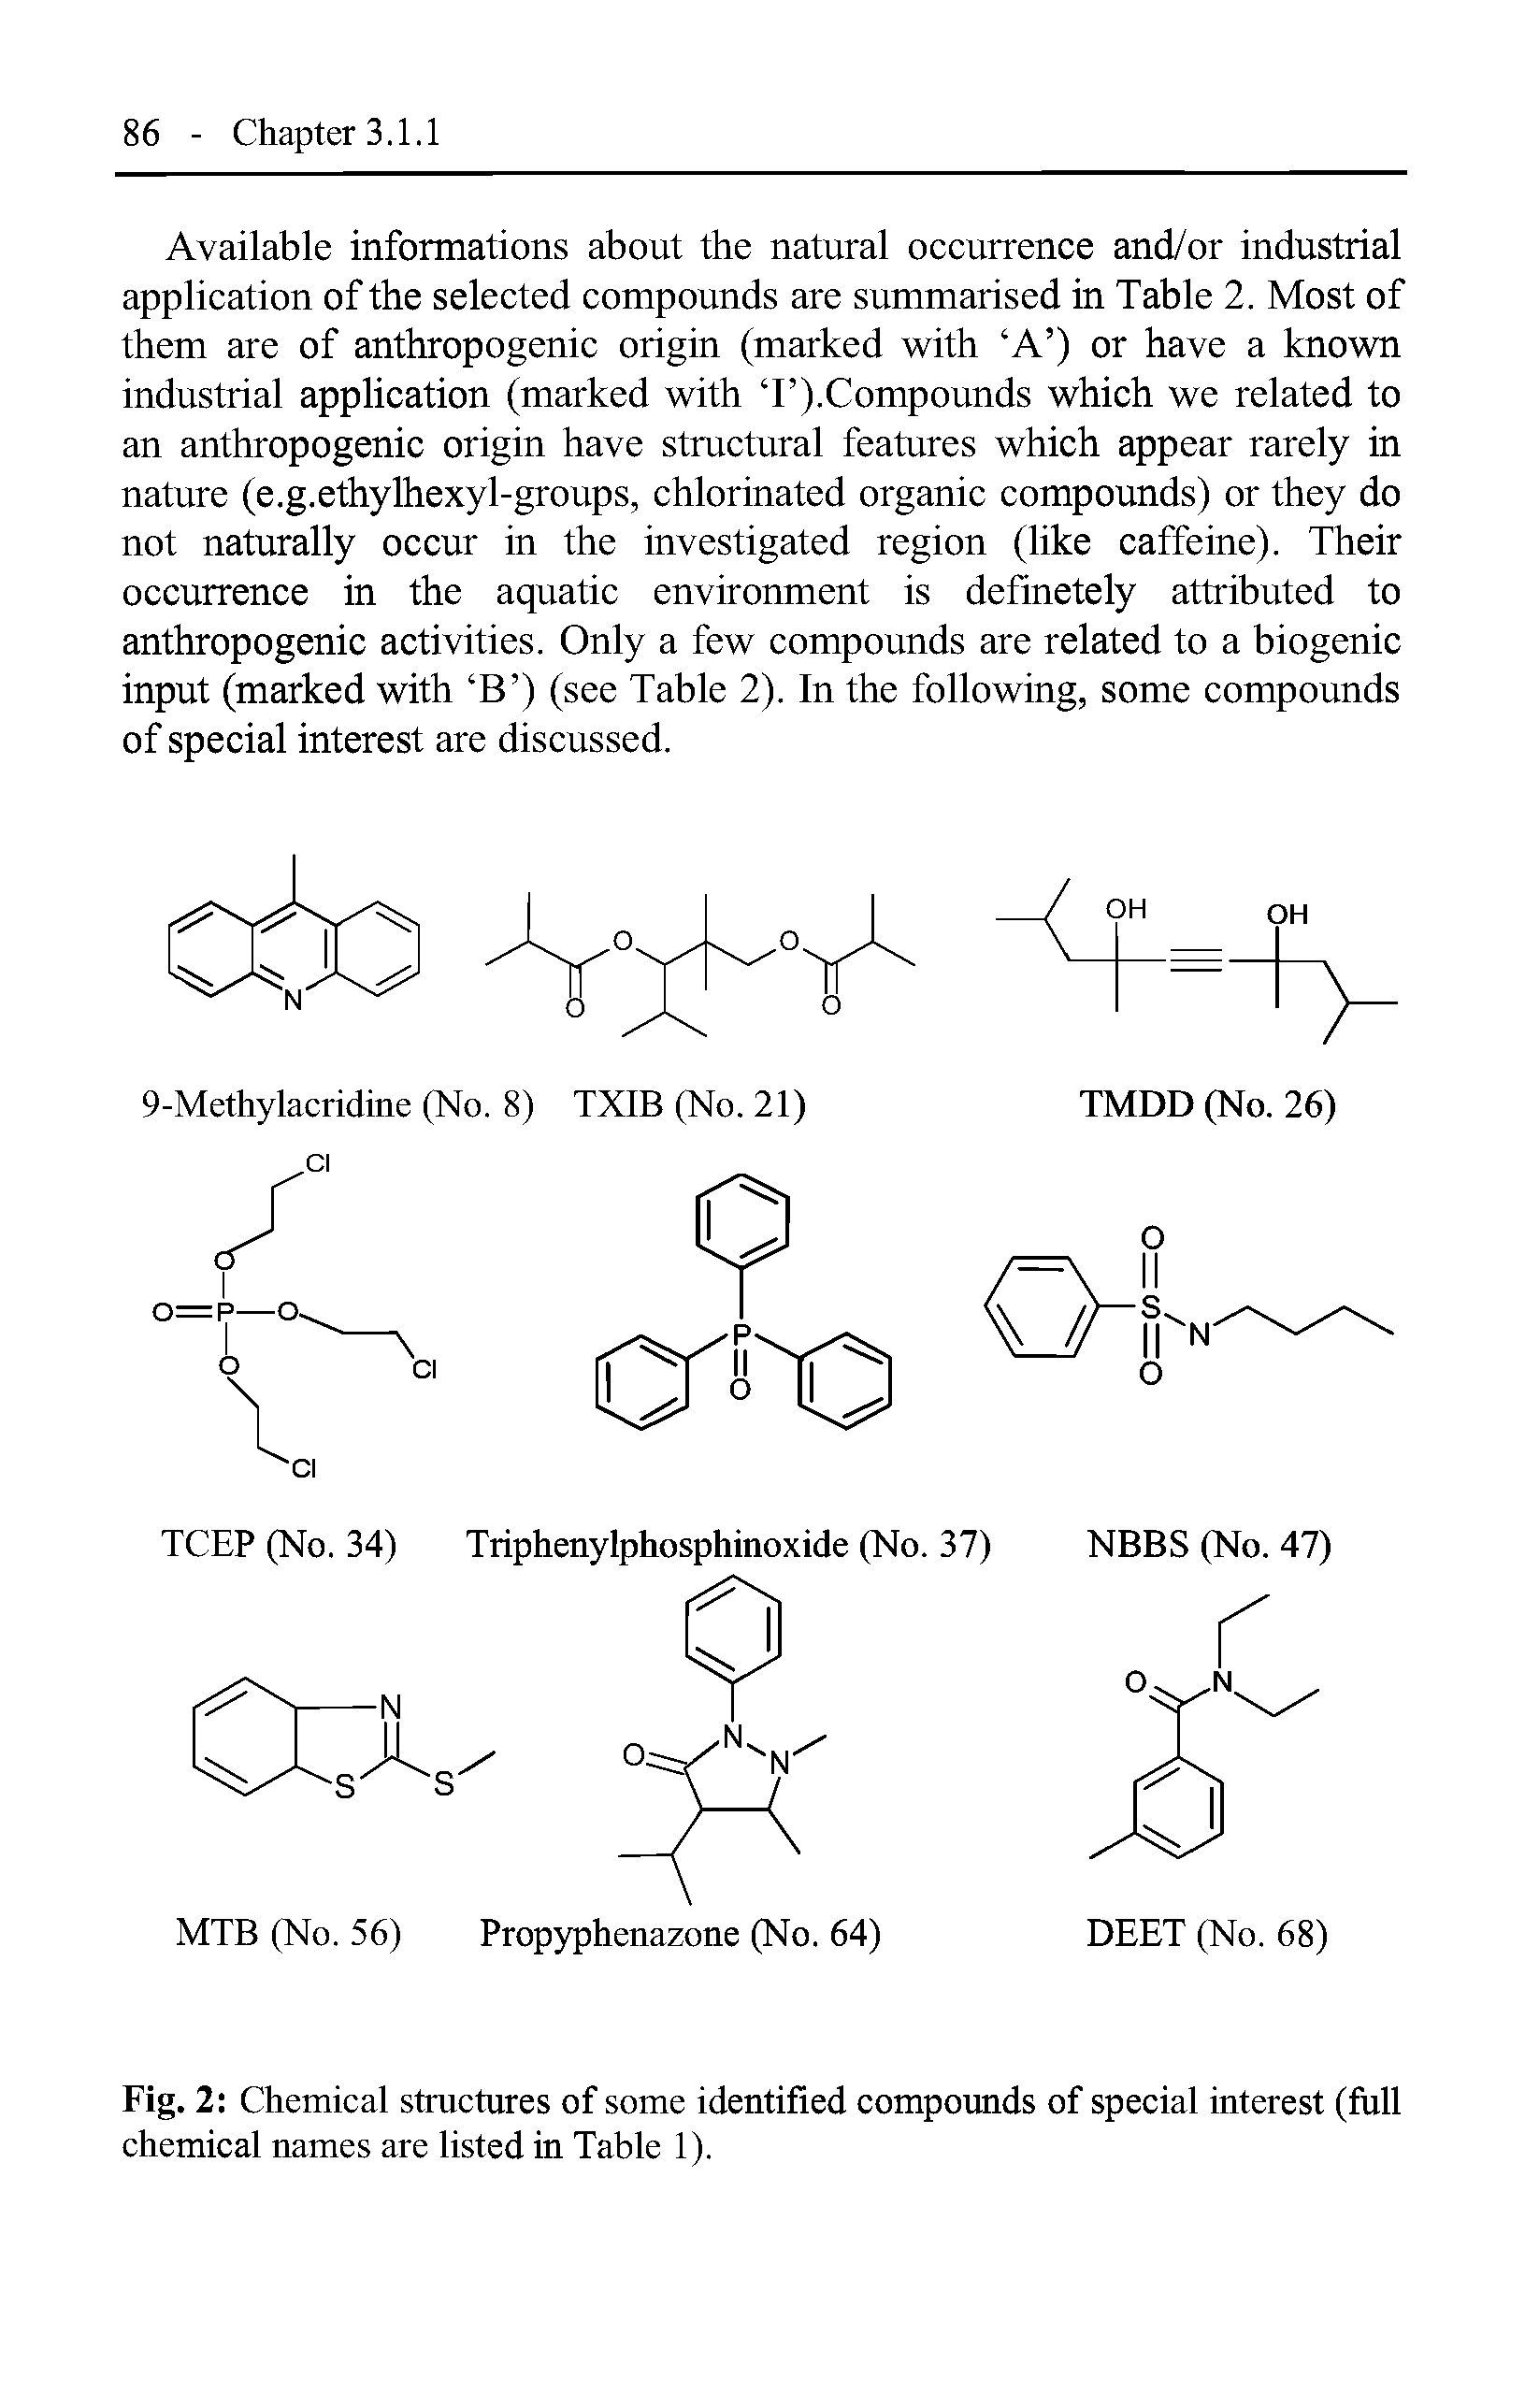 Fig. 2 Chemical structures of some identified compounds of special interest (full chemical names are listed in Table 1).